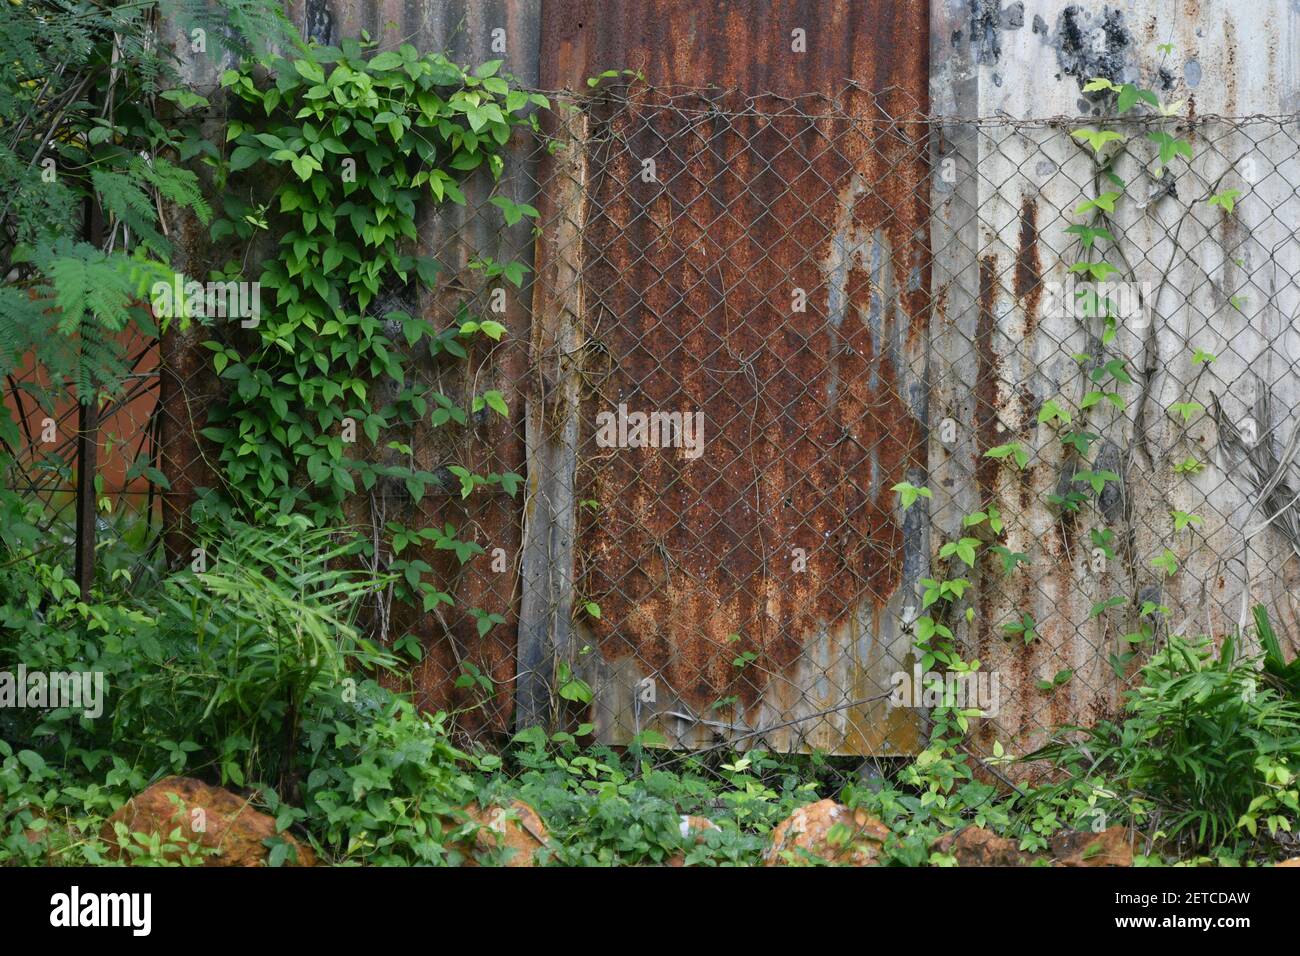 Plants and vine leaves growing on old rusty, tin fence. Stock Photo